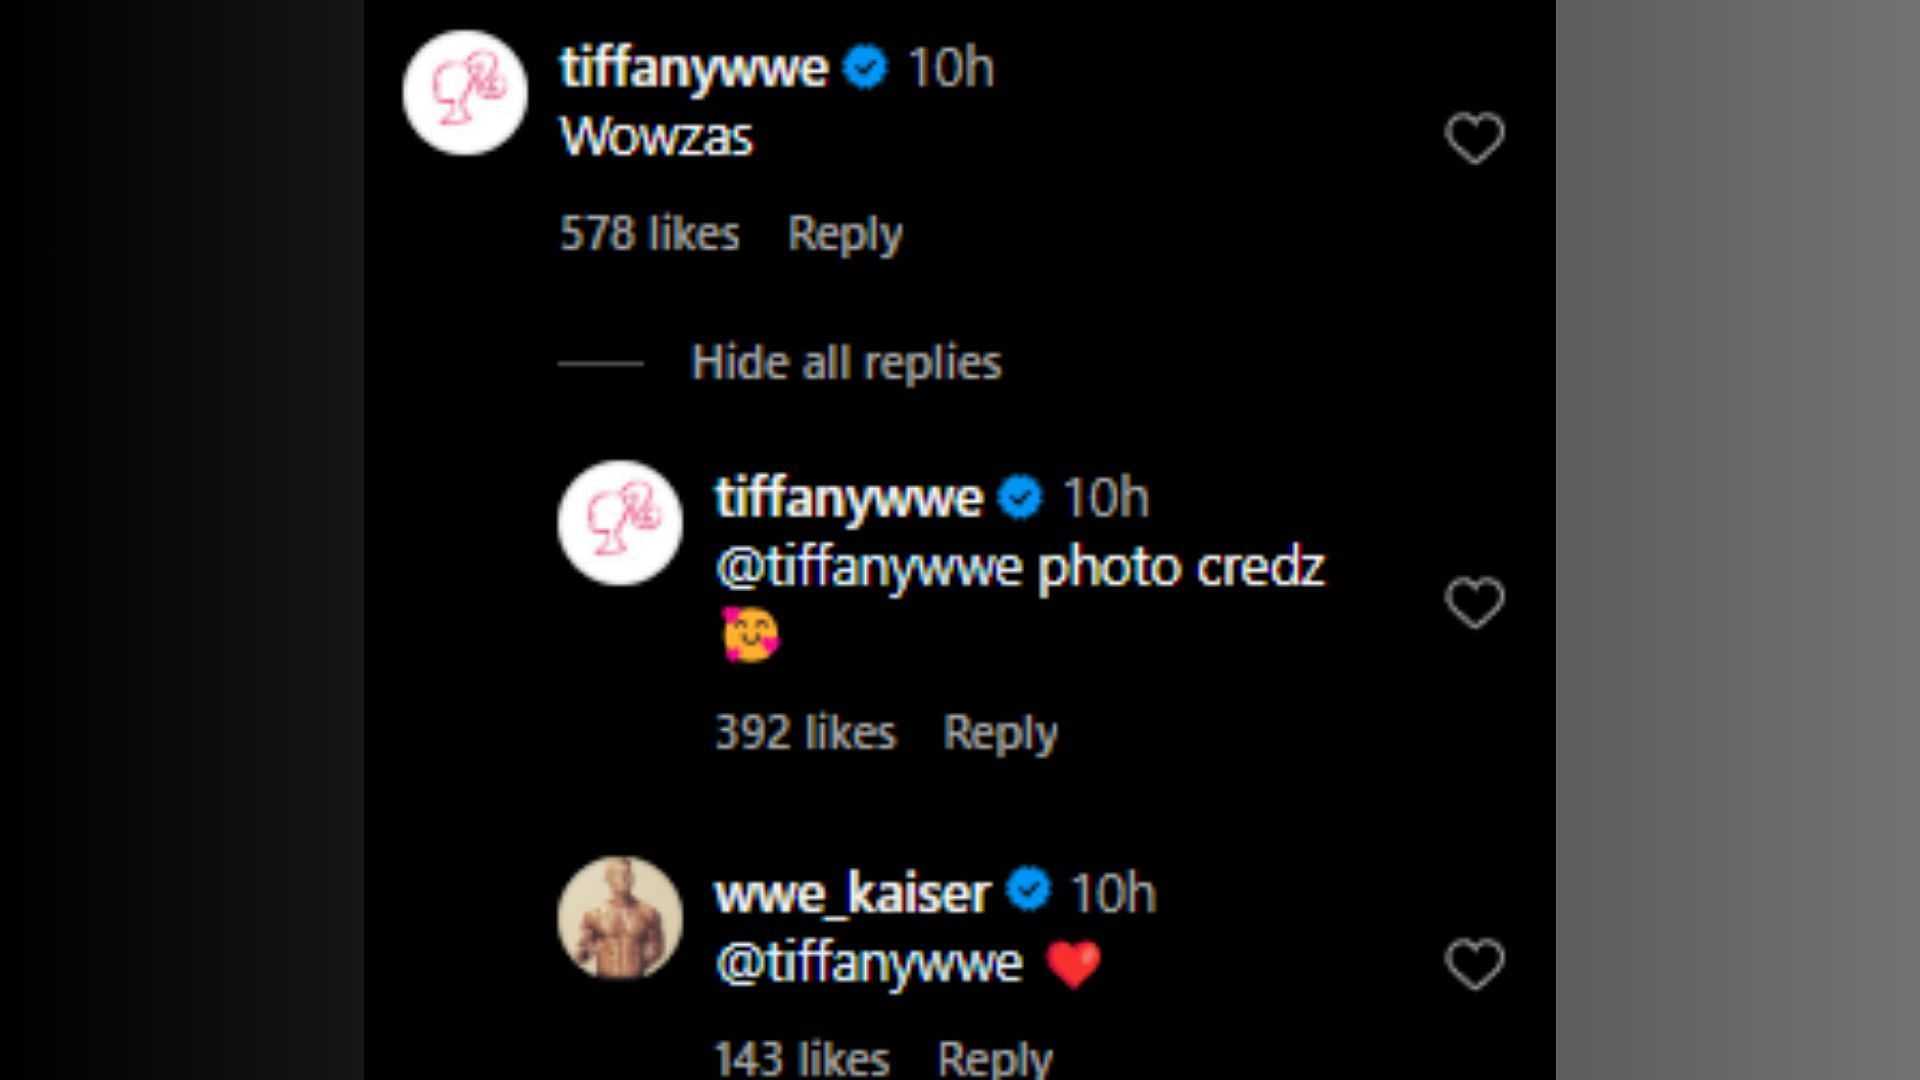 Tiffany commented on Ludwig&#039;s Instagram post and received a reply soon after.